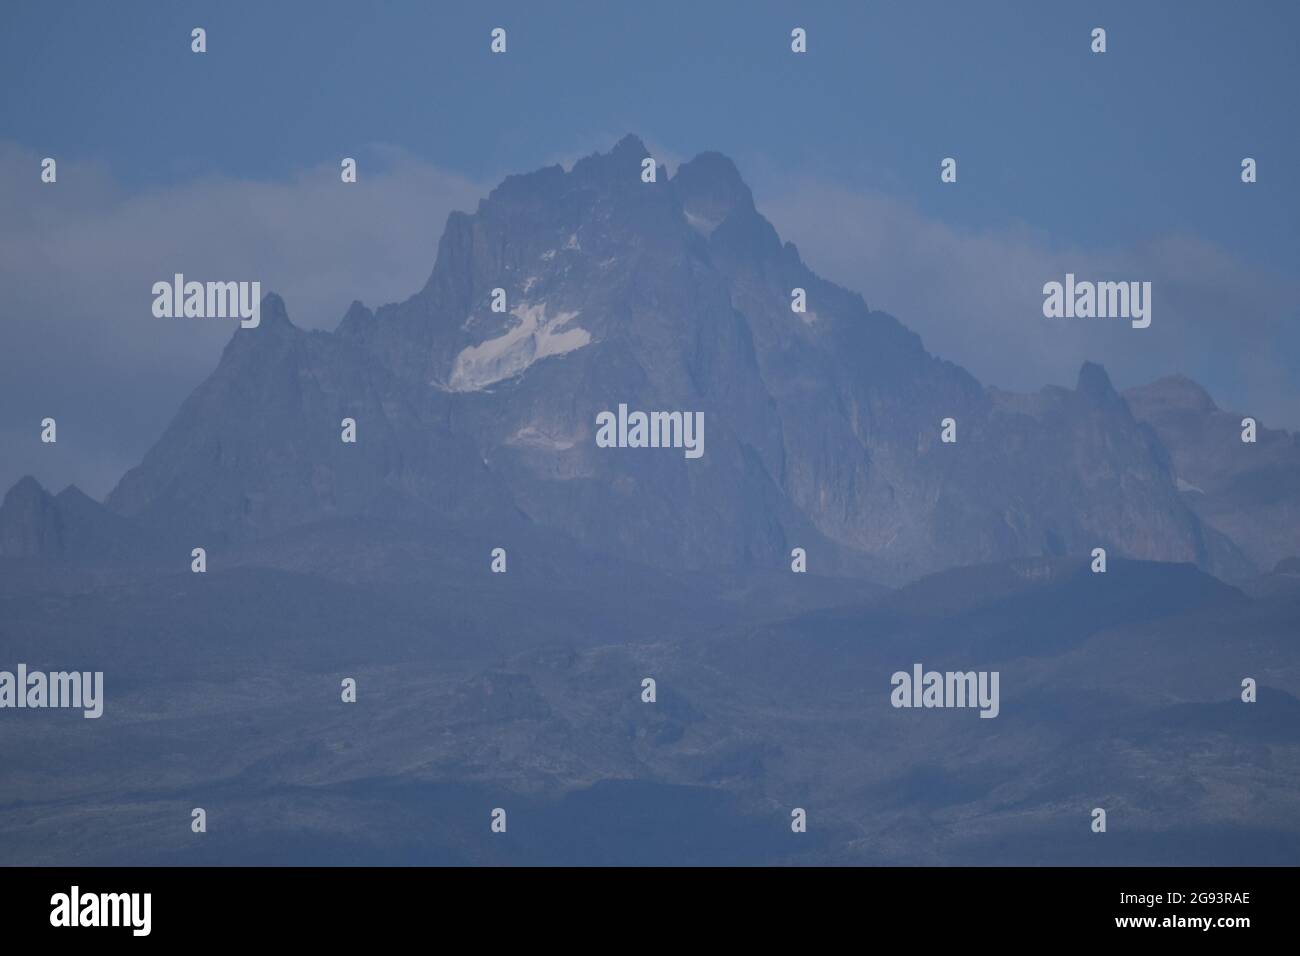 Mt.Kenya, the tallest mountain in Kenya at 5199m above sea level and the 2nd highest peak in Africa. Stock Photo